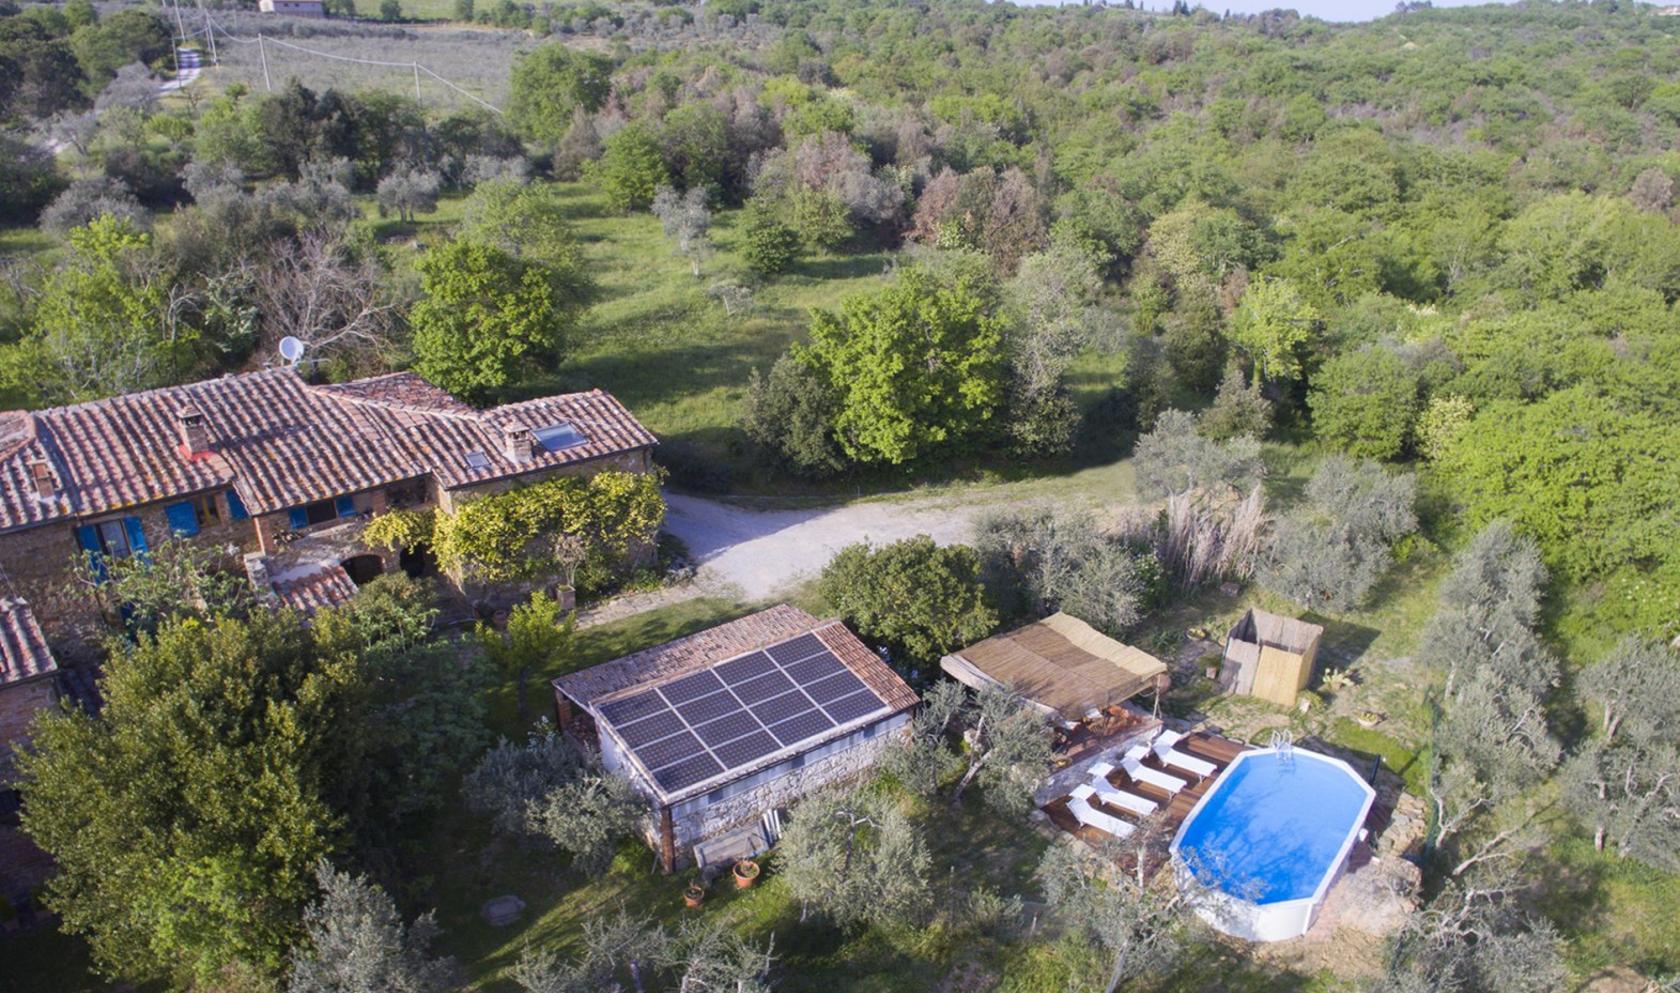 Toscana Immobiliare - The main building consists of a 180 sqm old stone farmhouse on two levels, divided into two apartments